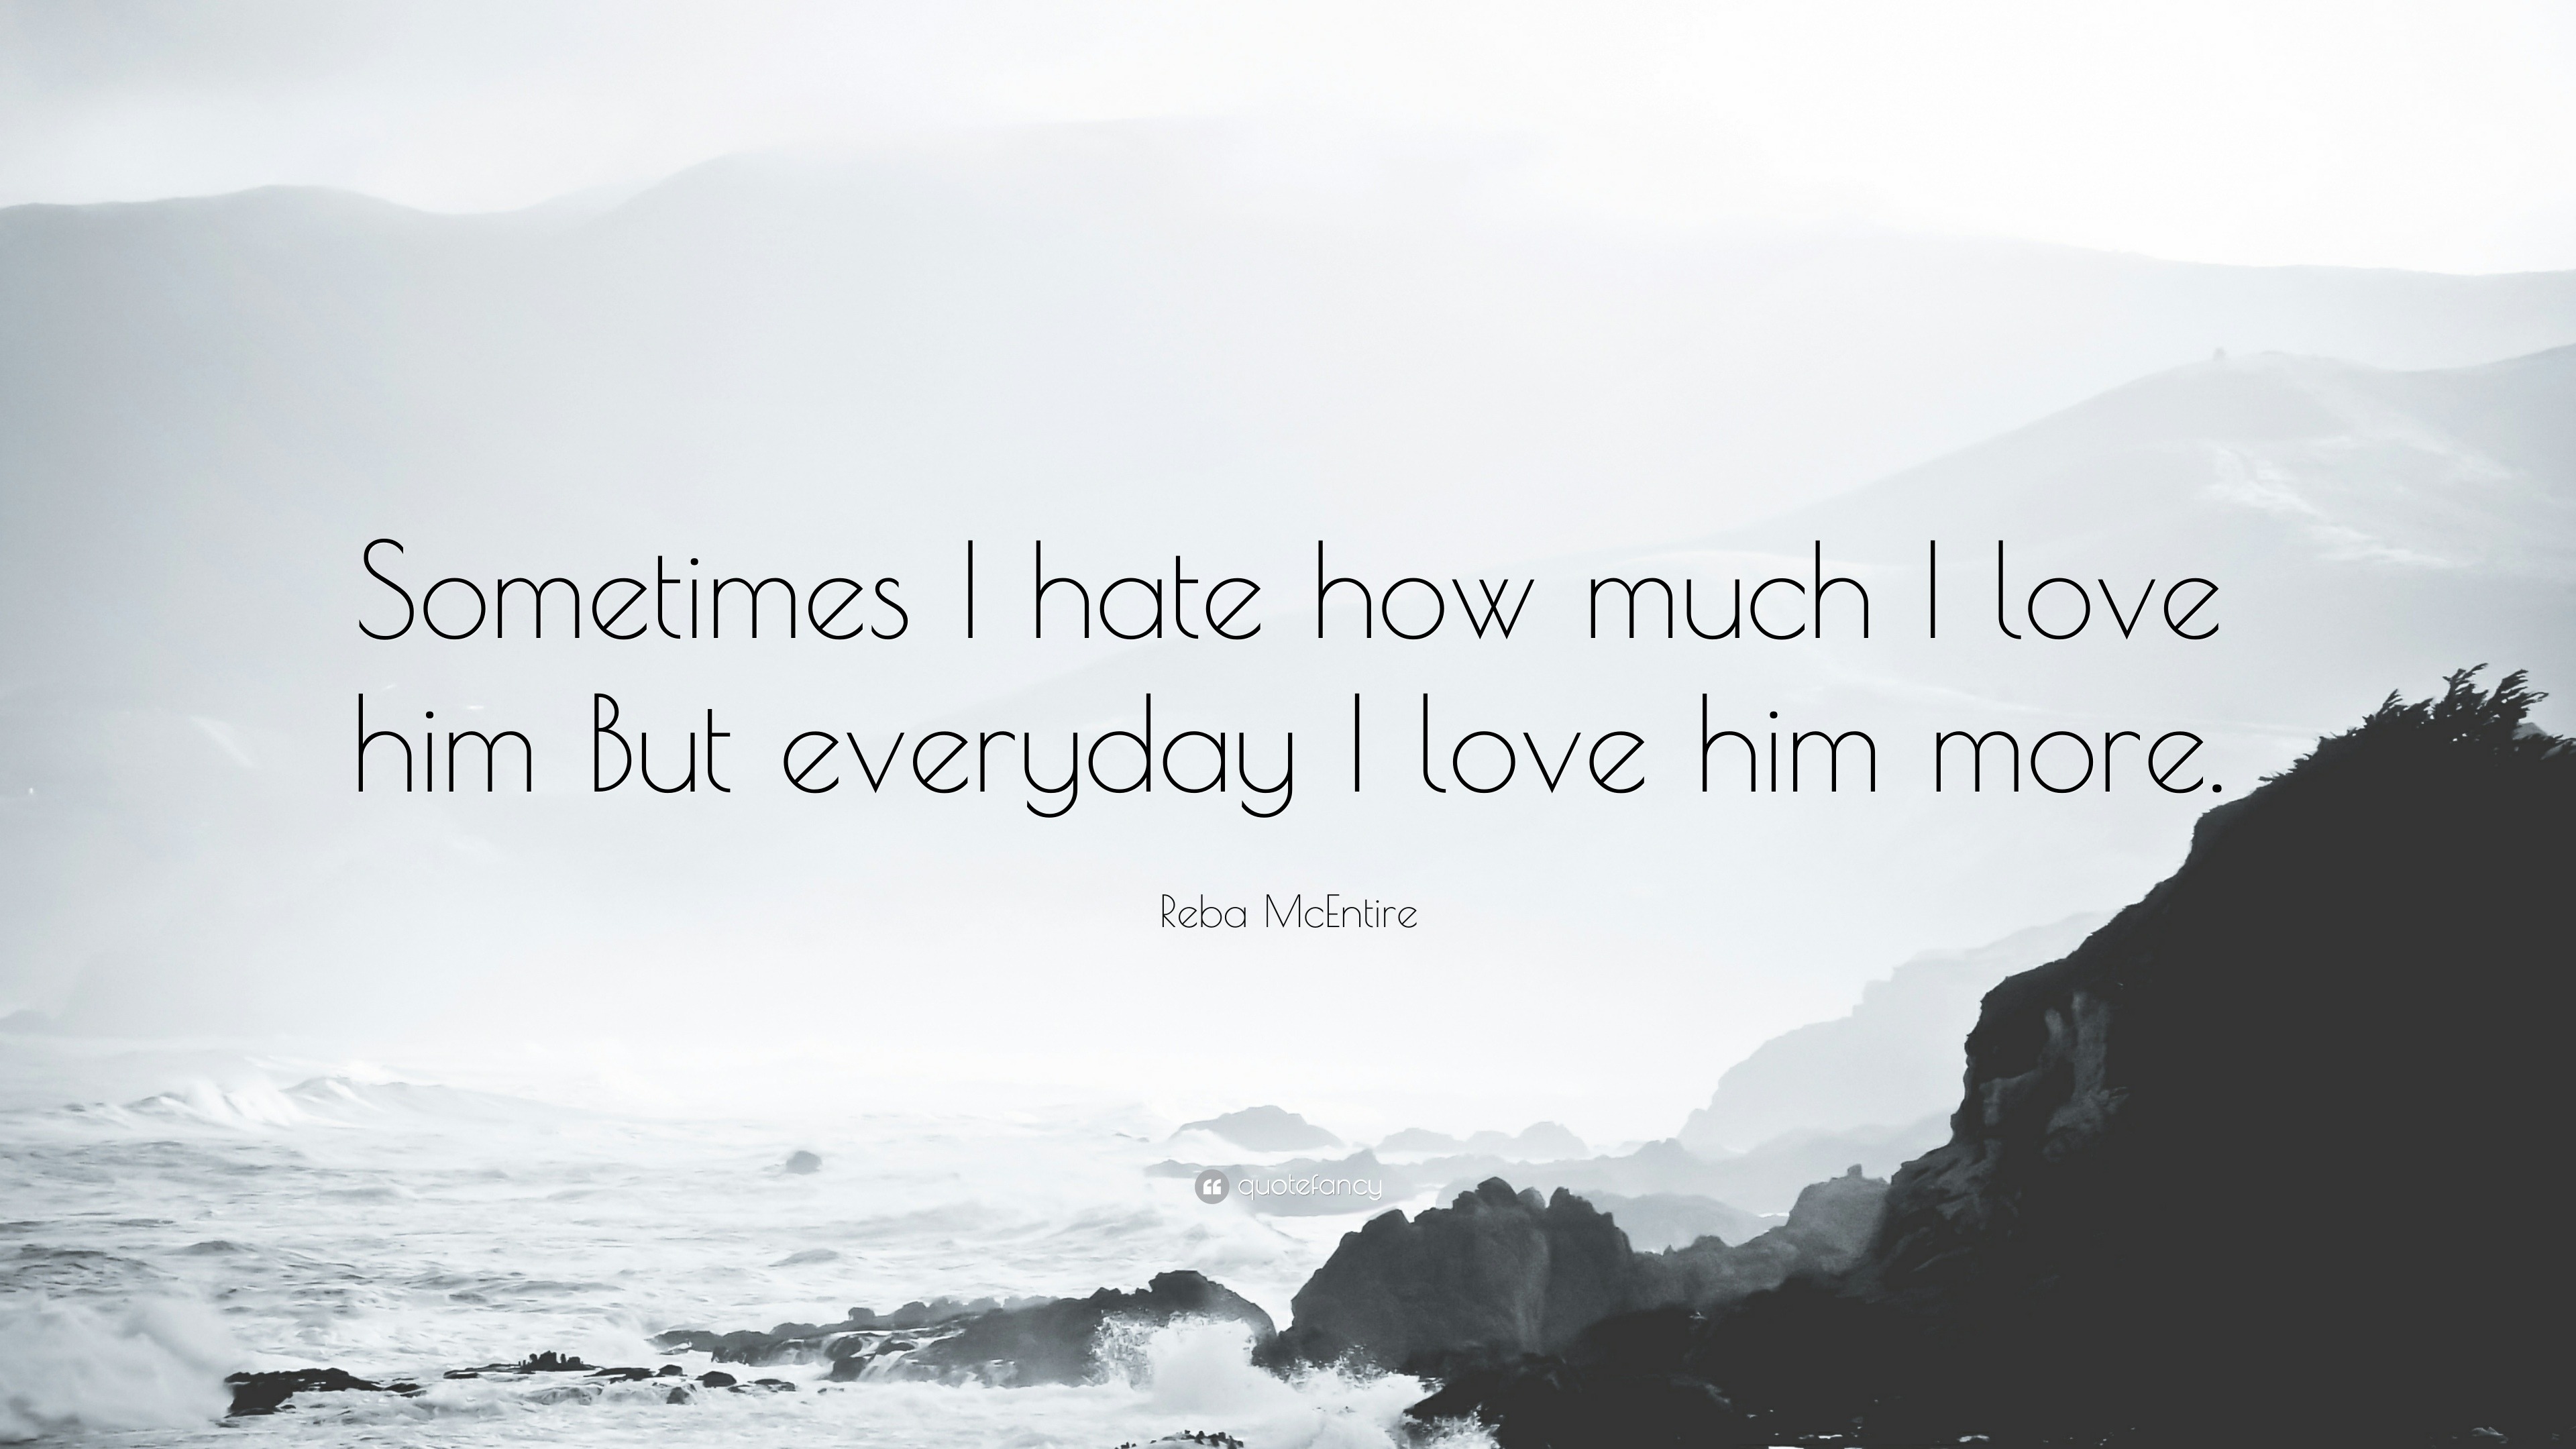 Reba McEntire Quote “Sometimes I hate how much I love him But everyday I